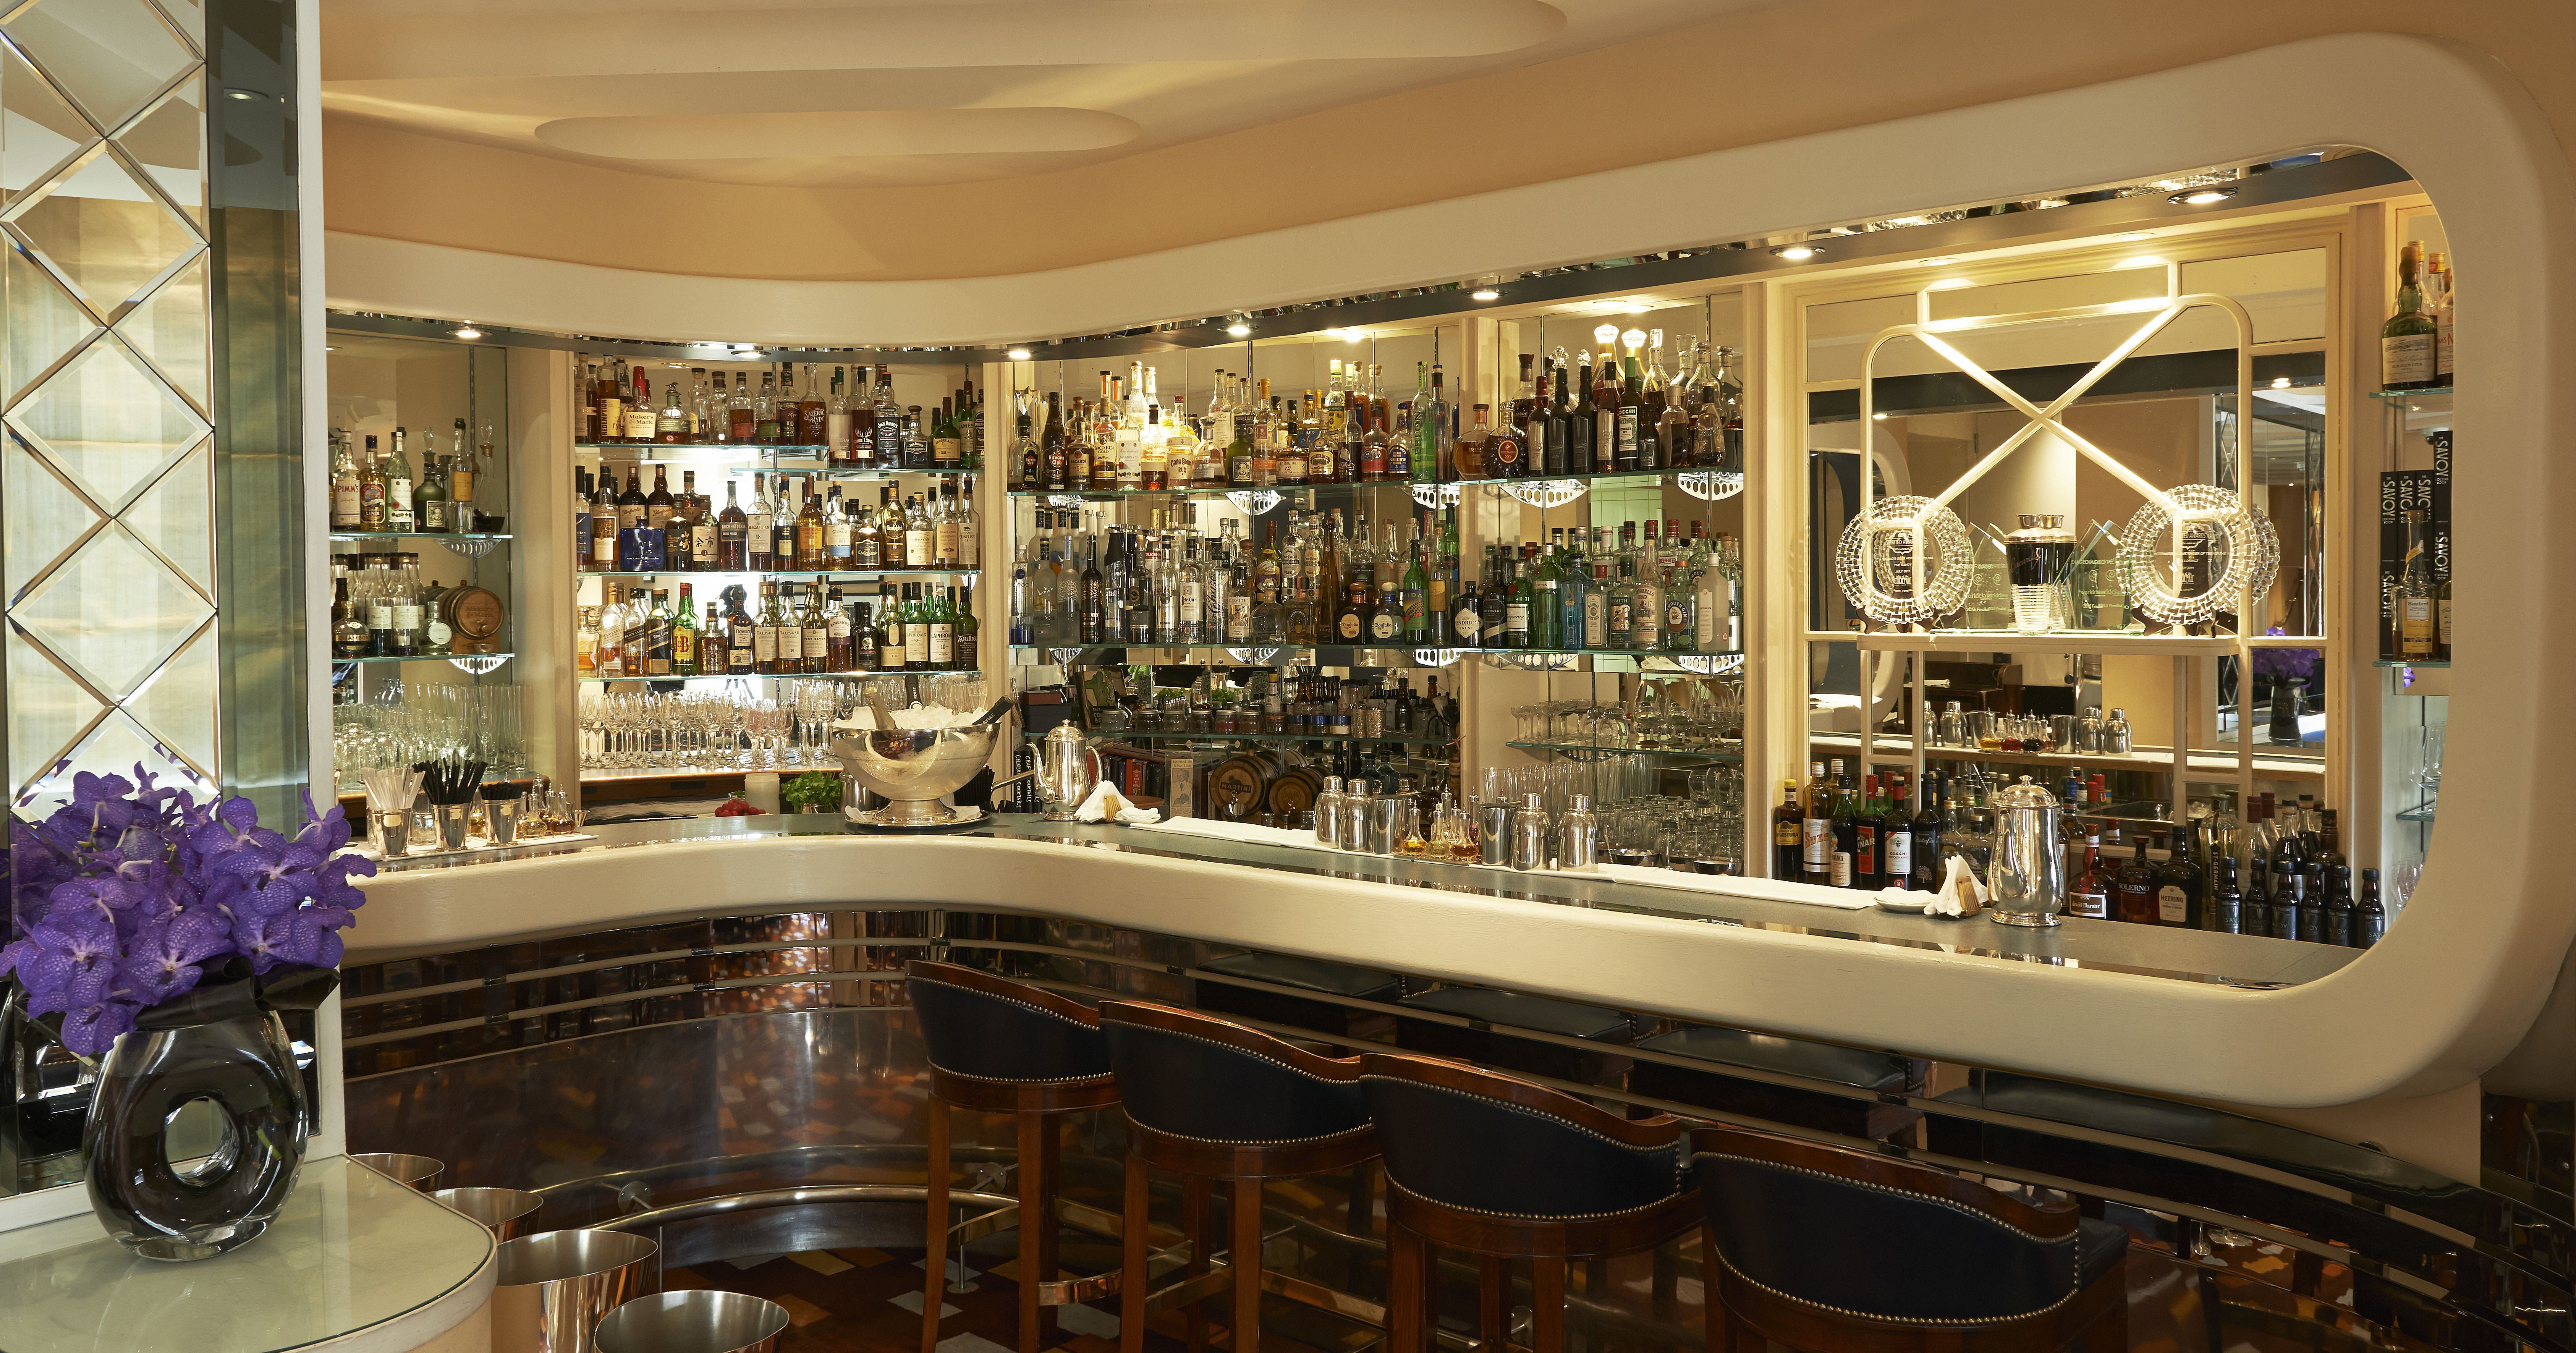 The American Bar at The Savoy – A day in Covent Garden